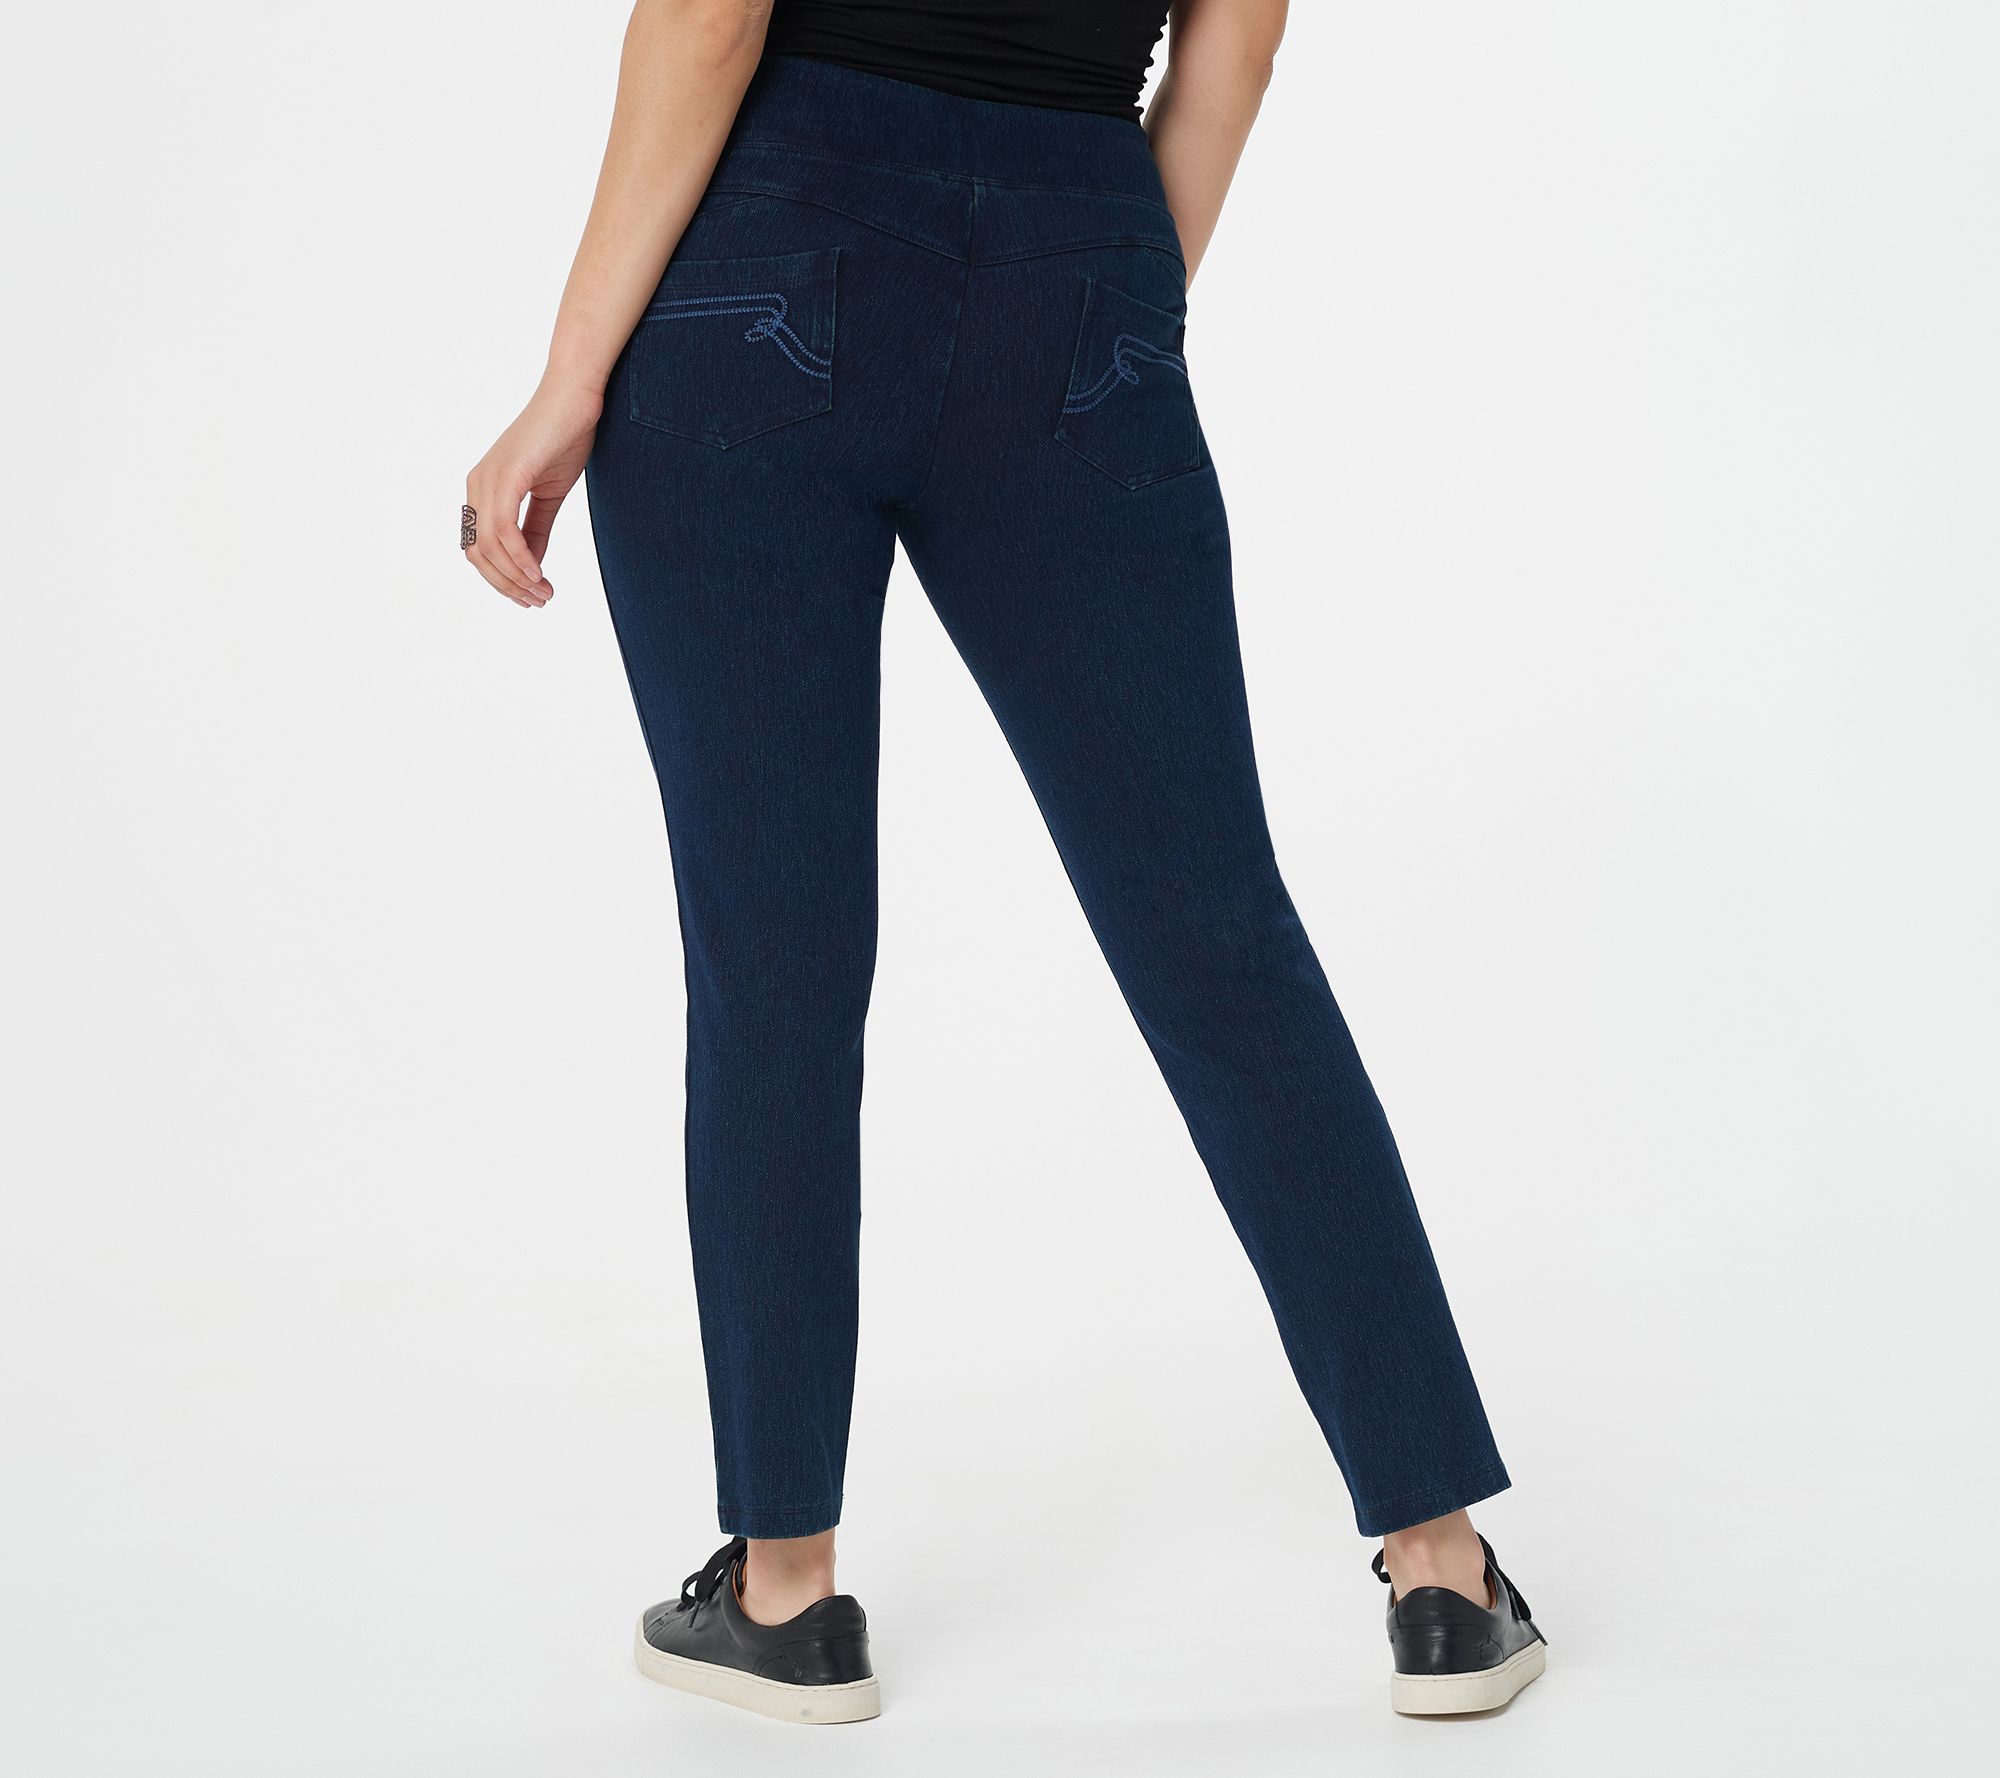 Women with Control Regular Prime Stretch Demin Leggings with Pockets